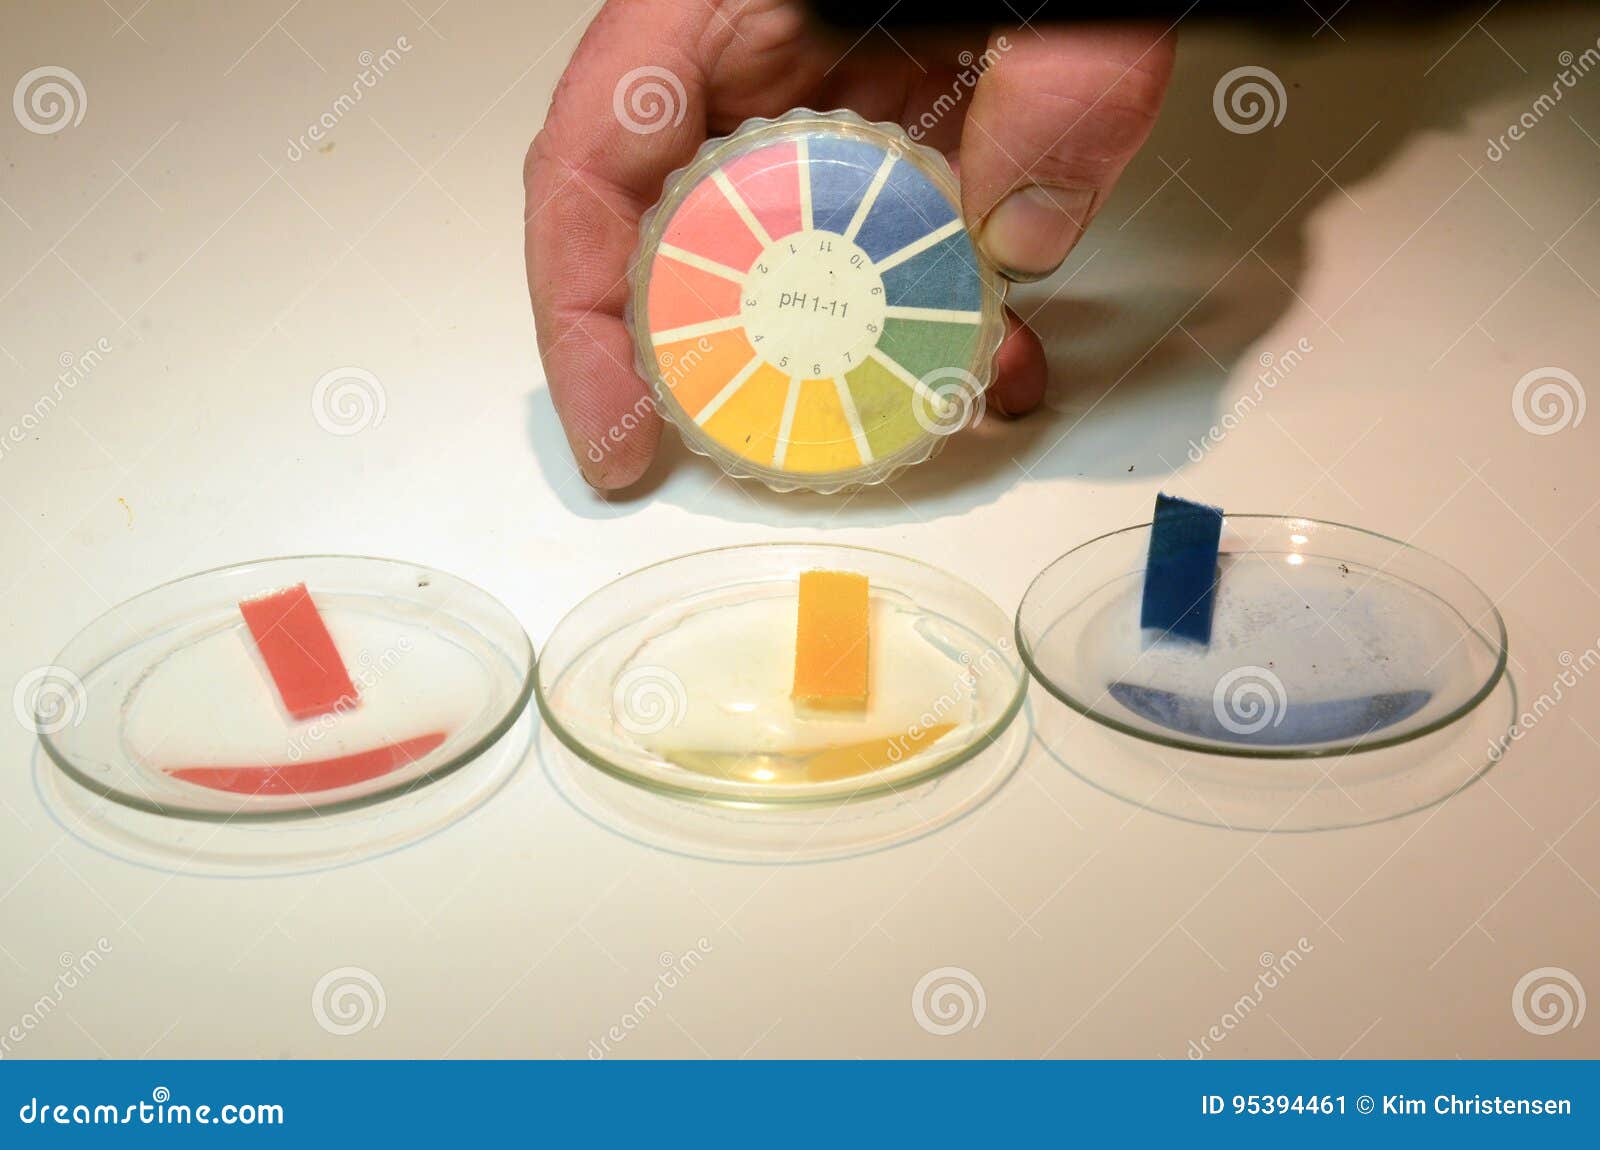 PH test with universal indicator paper - Stock Image - C033/2862